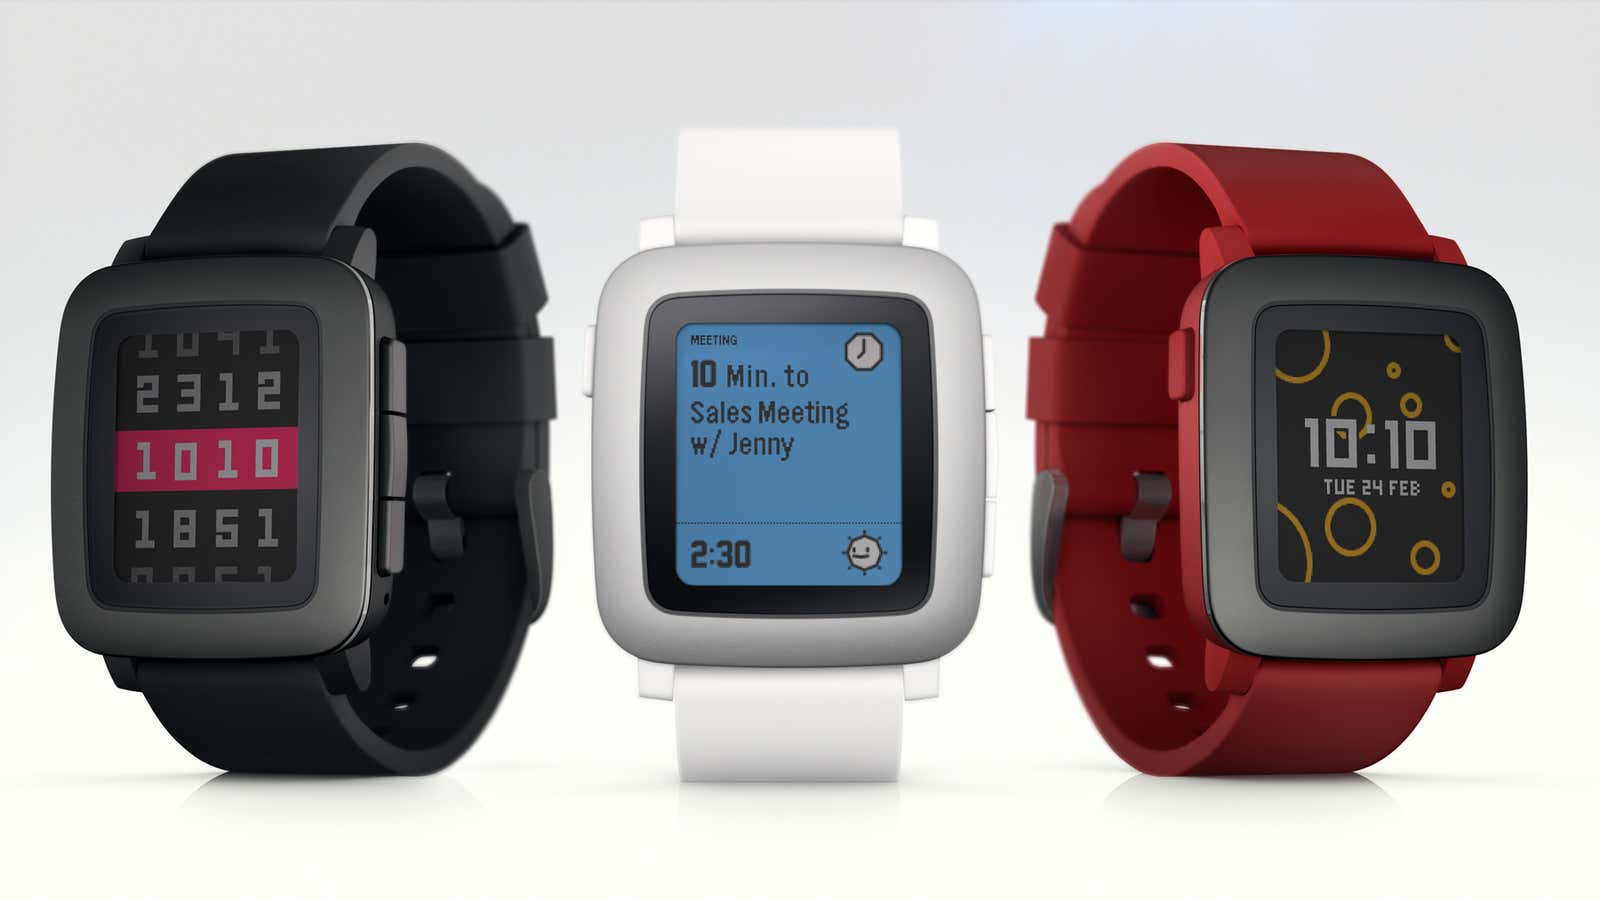 The new Pebble Time smartwatch.